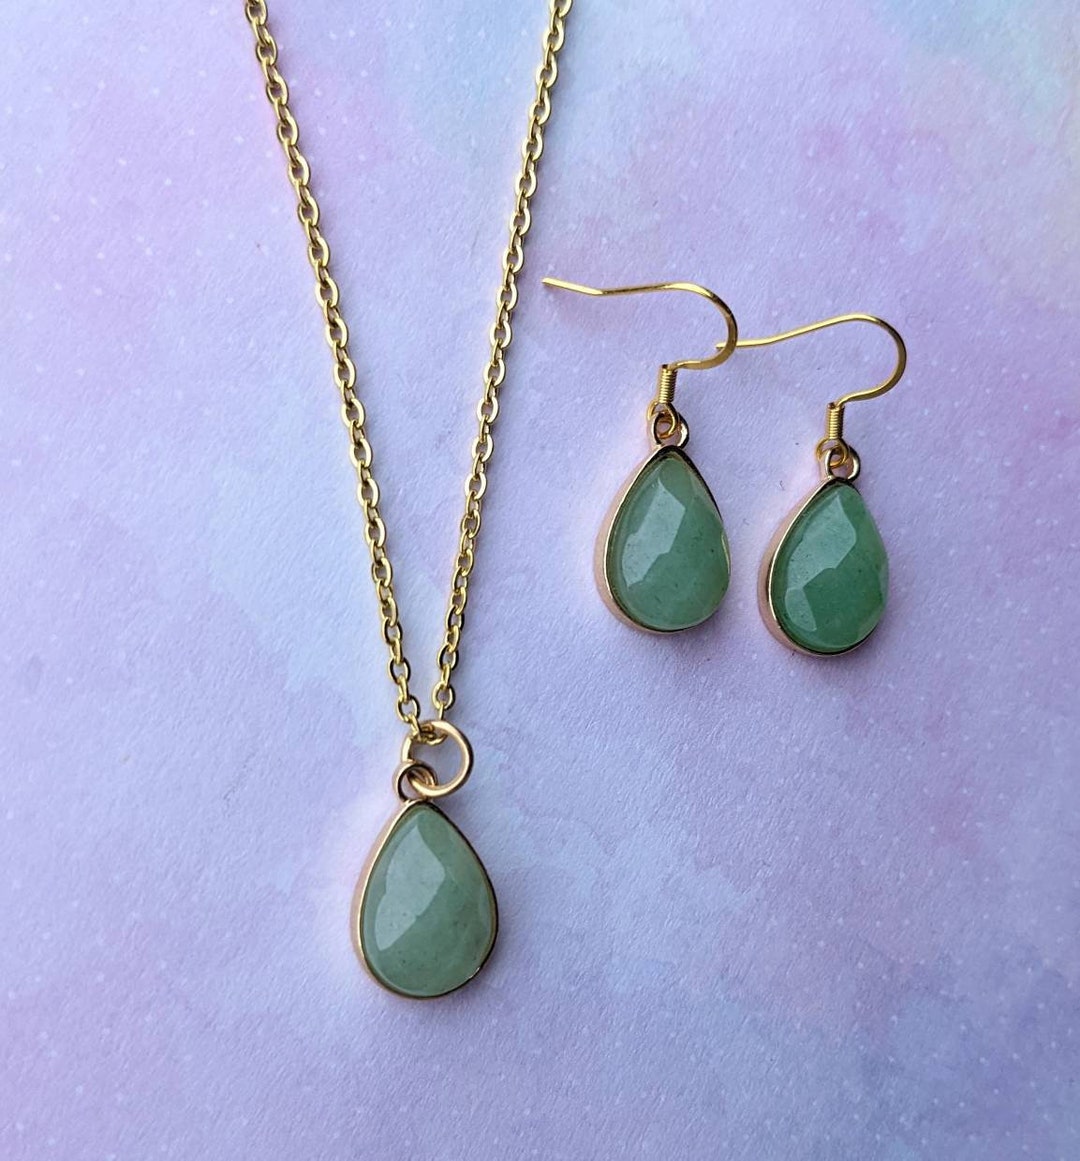 Dainty Natural Green Aventurine Teardrop Pendant Necklace. Gold, Stainless Steel. - Etsy